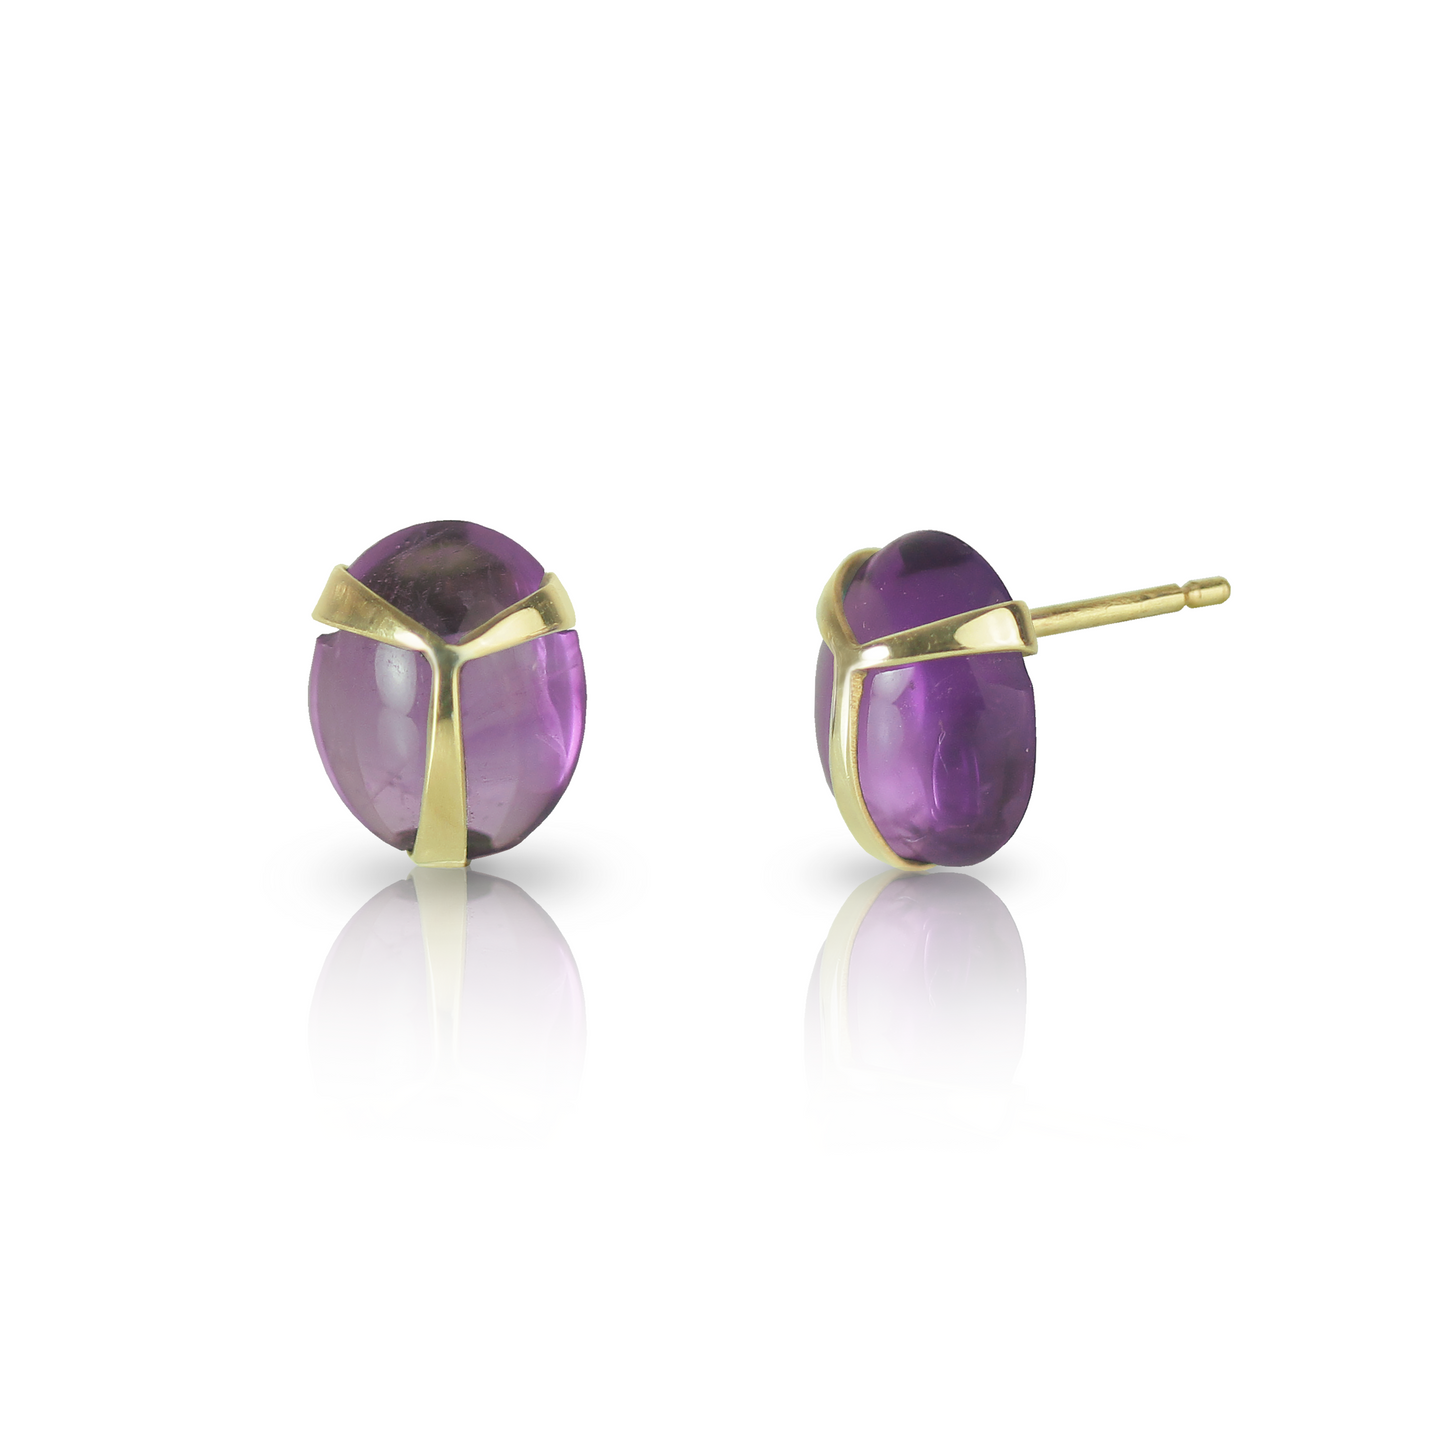 A pair of amethyst stud earrings with yellow gold beetle wing detail.